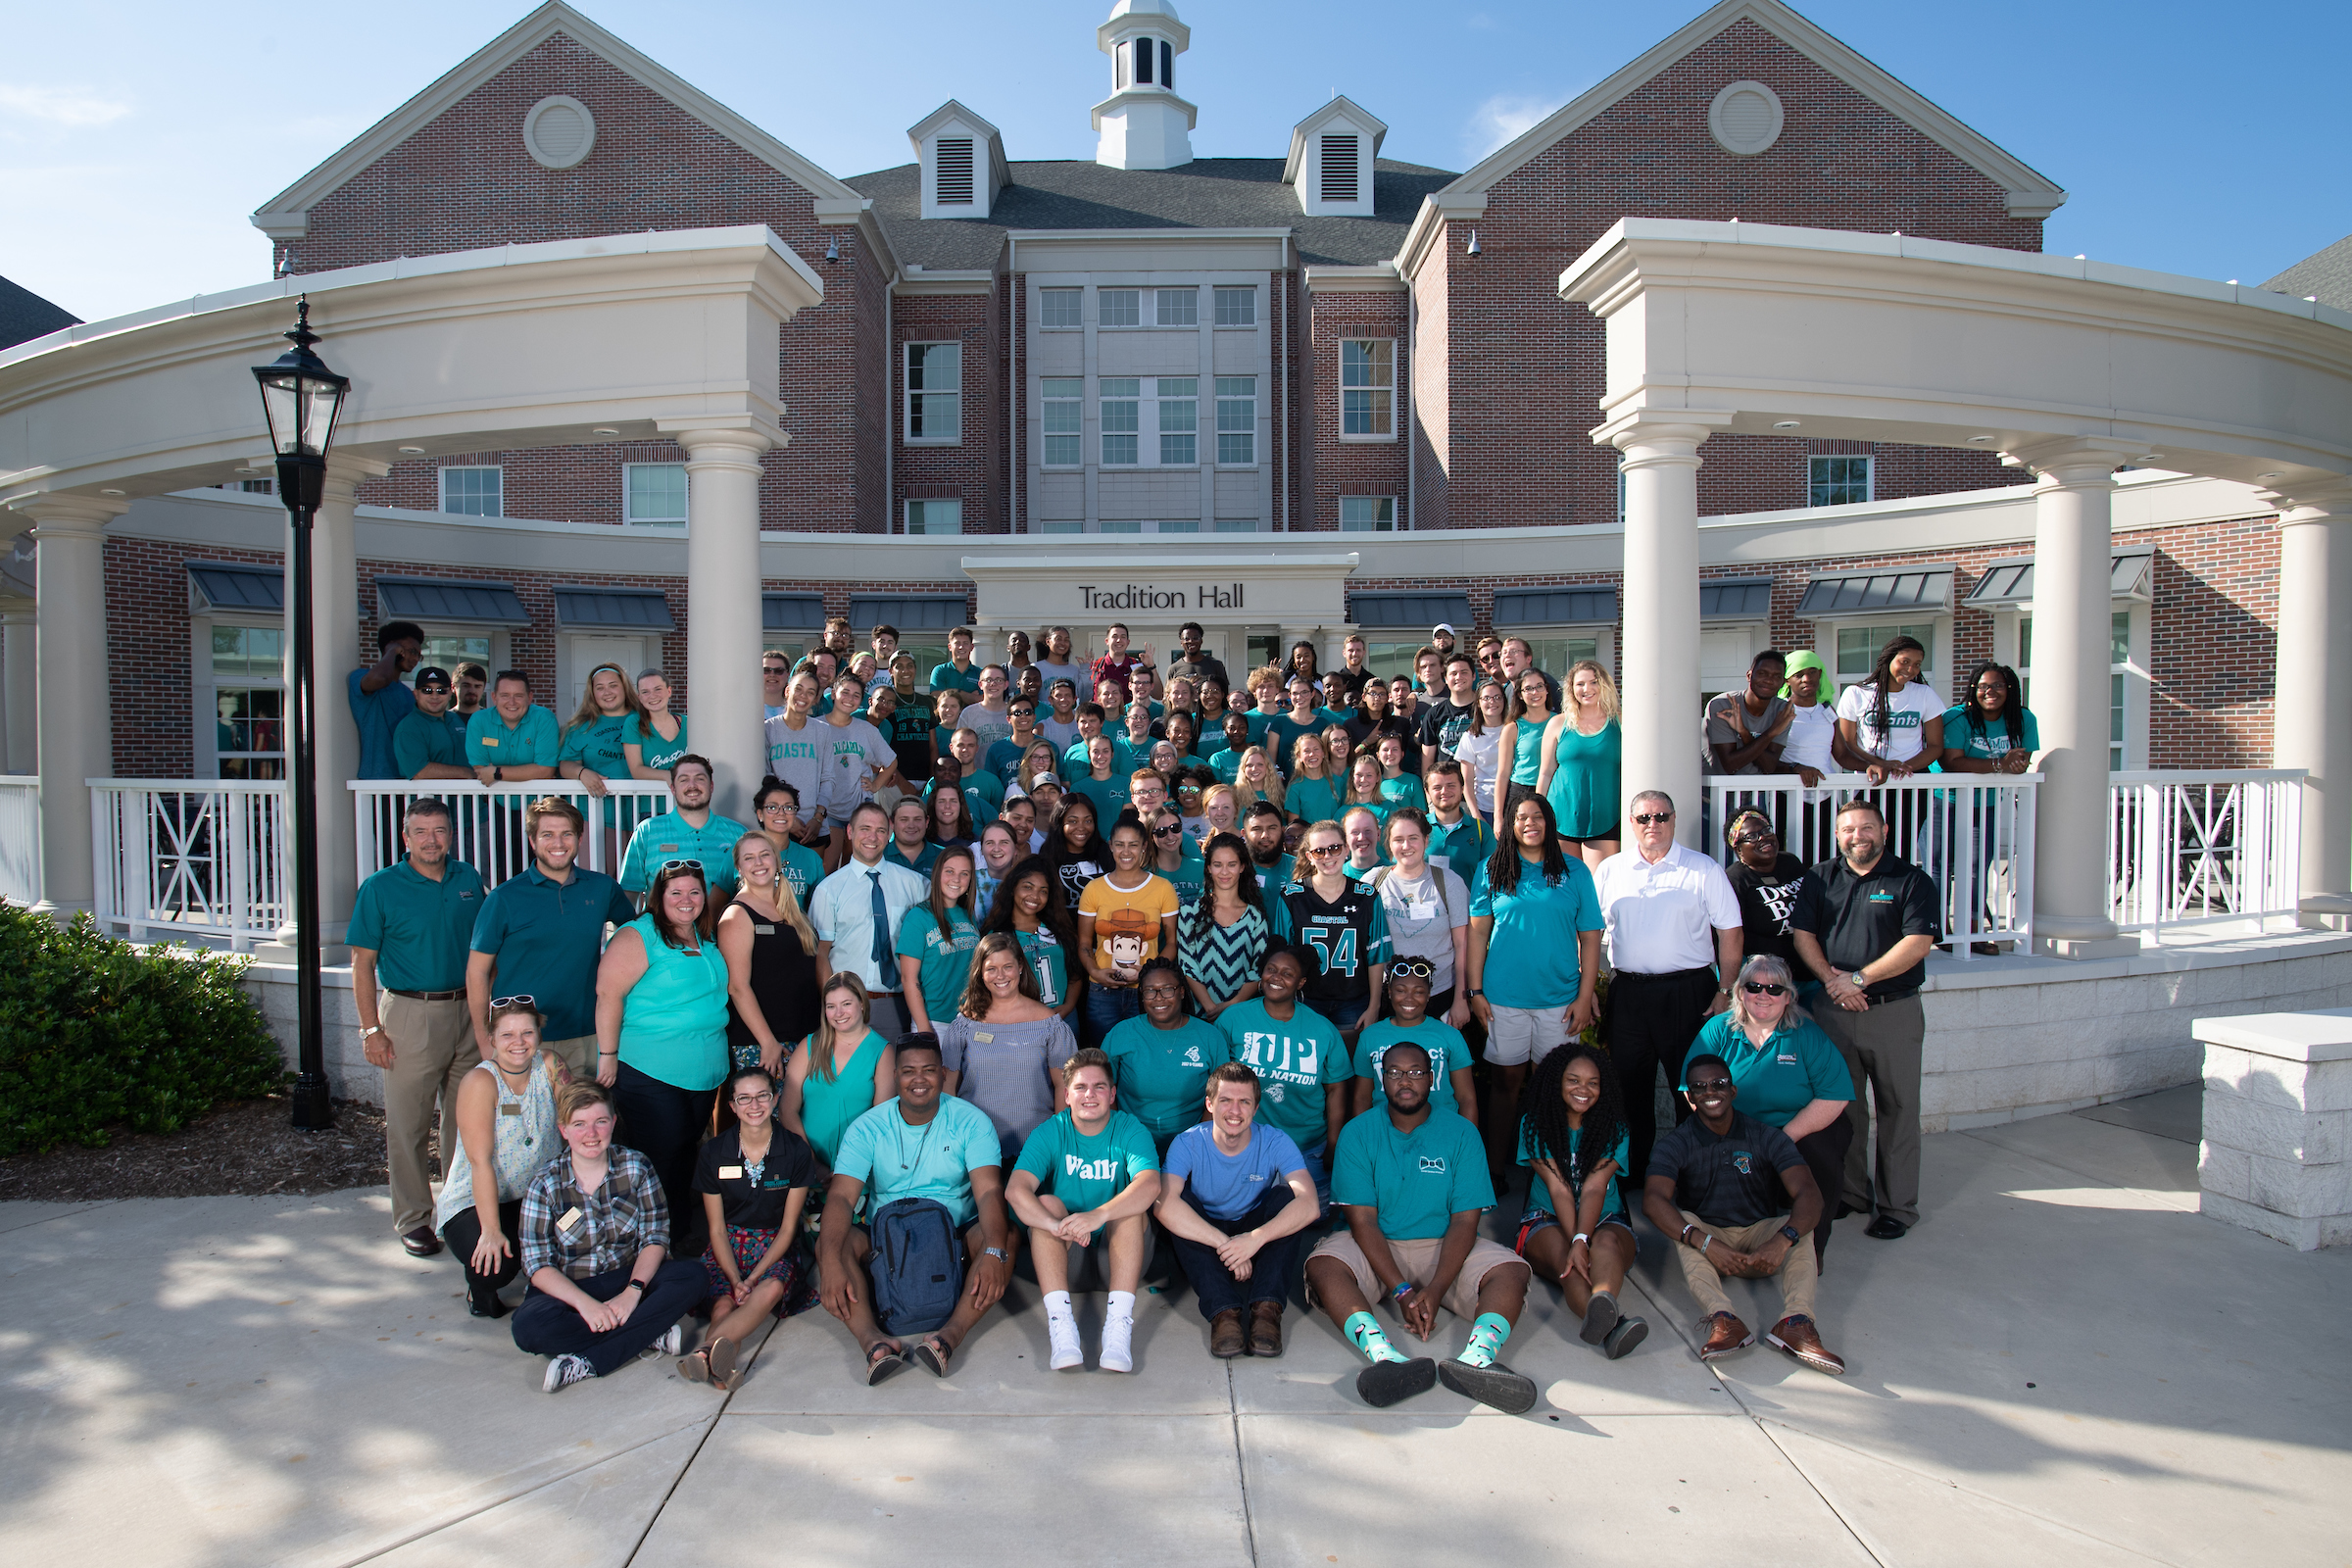 Resident advisers within University Housing attend a cookout each year as part of their training before students move in for the fall semester as a way to connect and engage with each other. These are the RAs for the 2018 academic year.